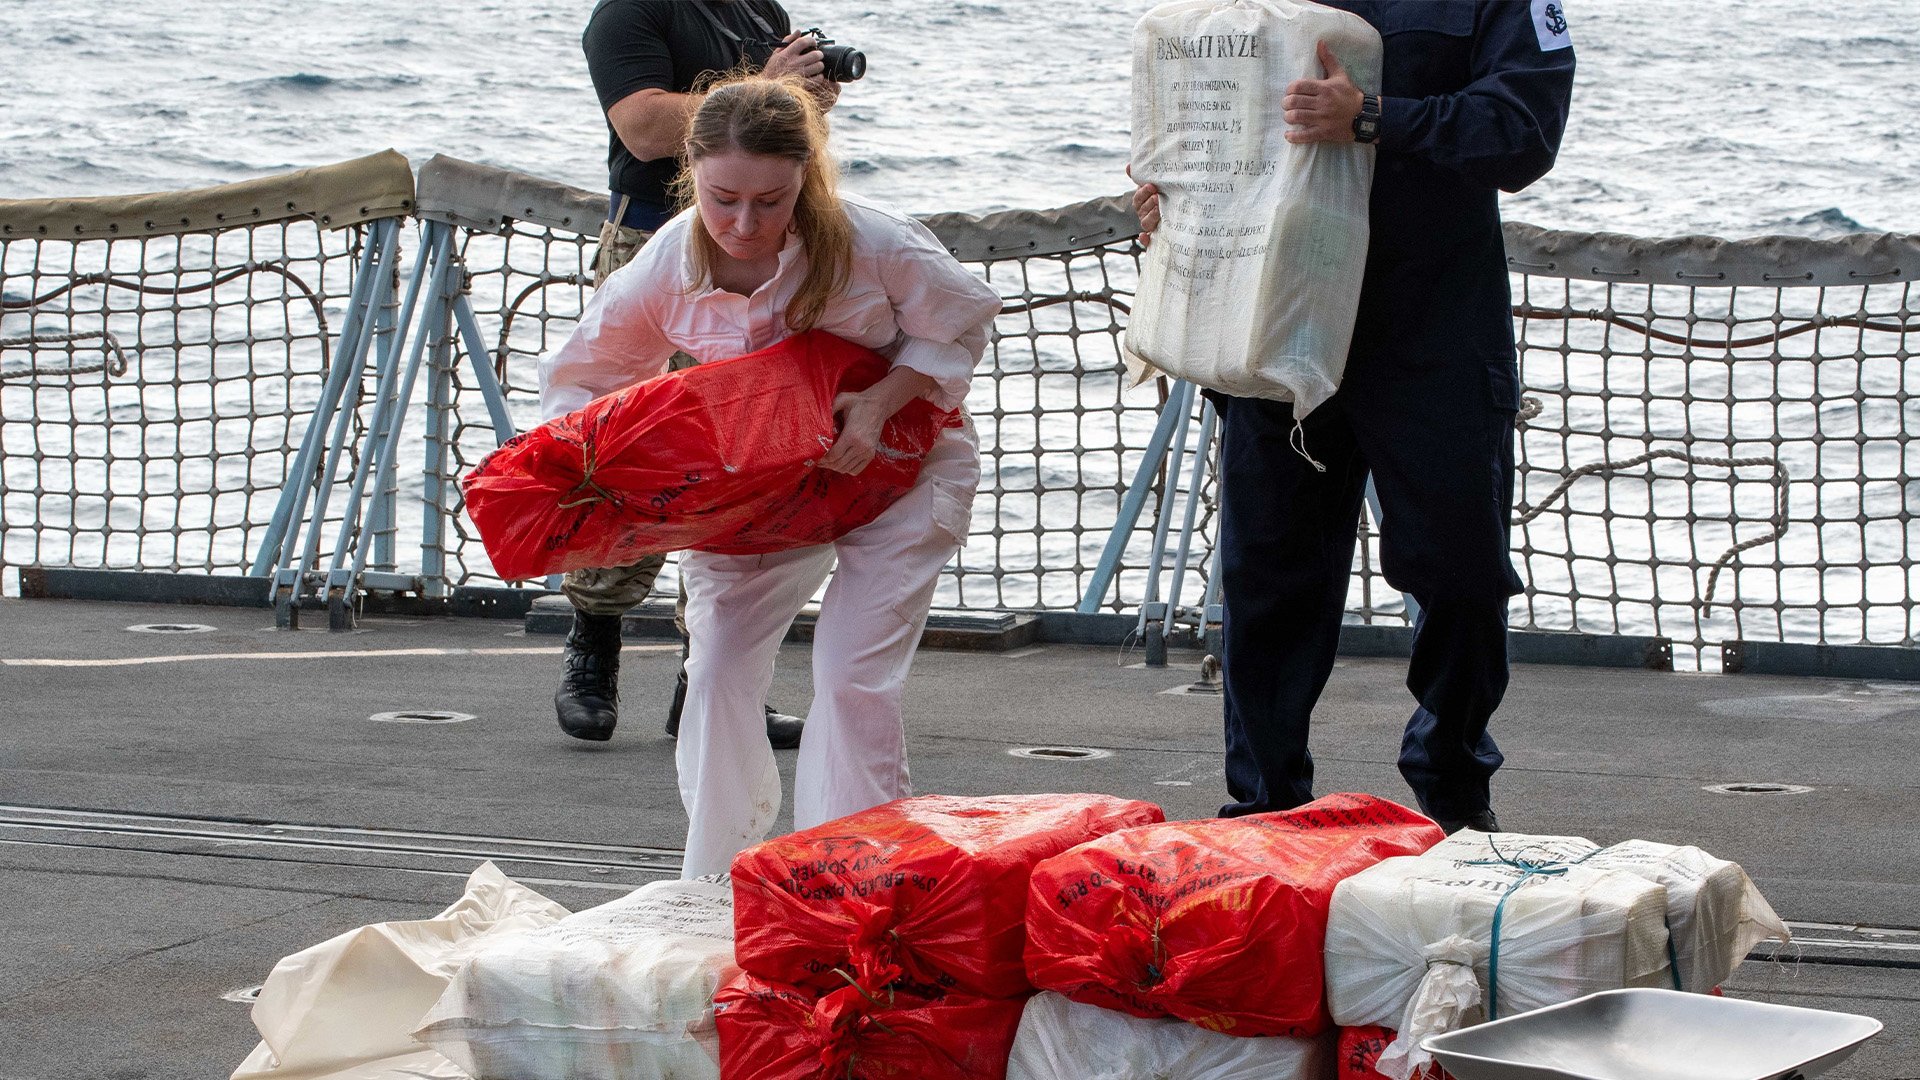 Sailors from the Royal Navy frigate Montrose inventory illicit drugs seized from a fishing vessel in international waters in the Gulf of Oman, Oct. 2., 2022. UK Royal Navy photo.